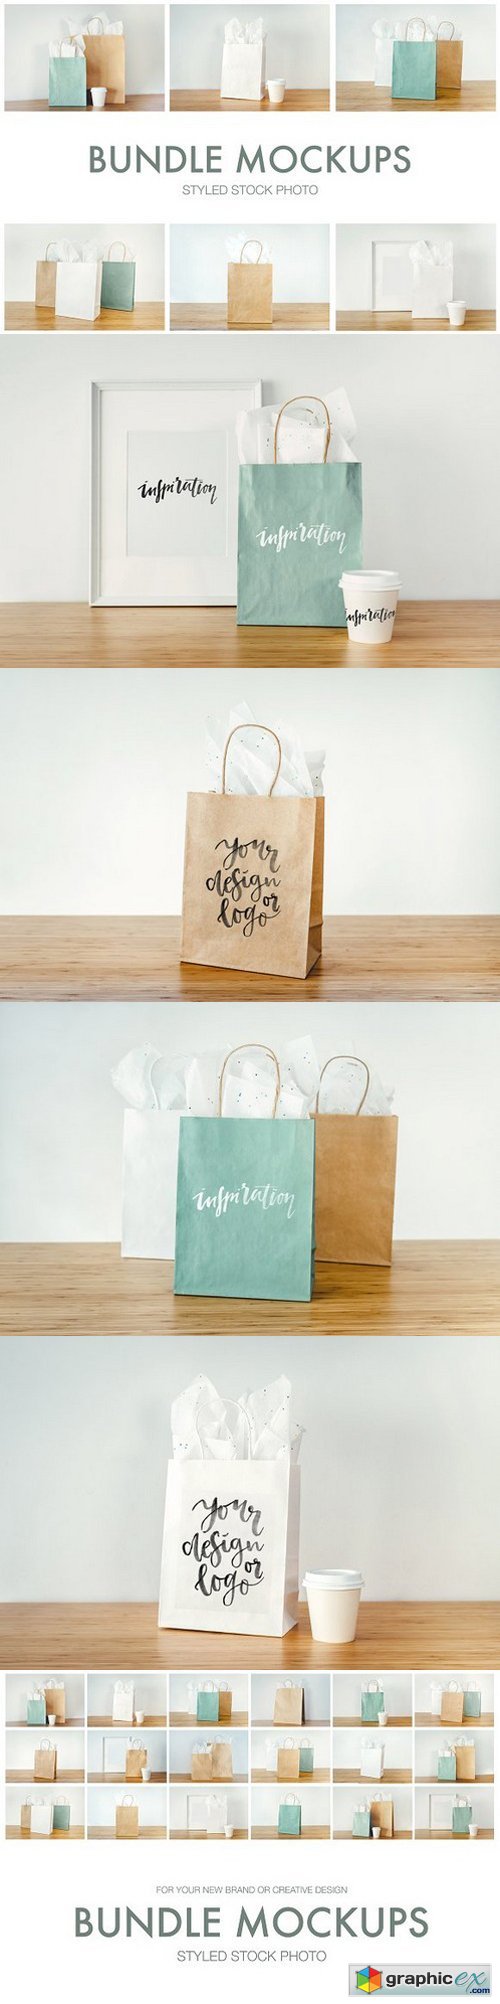 Mockups bags, cups and frames